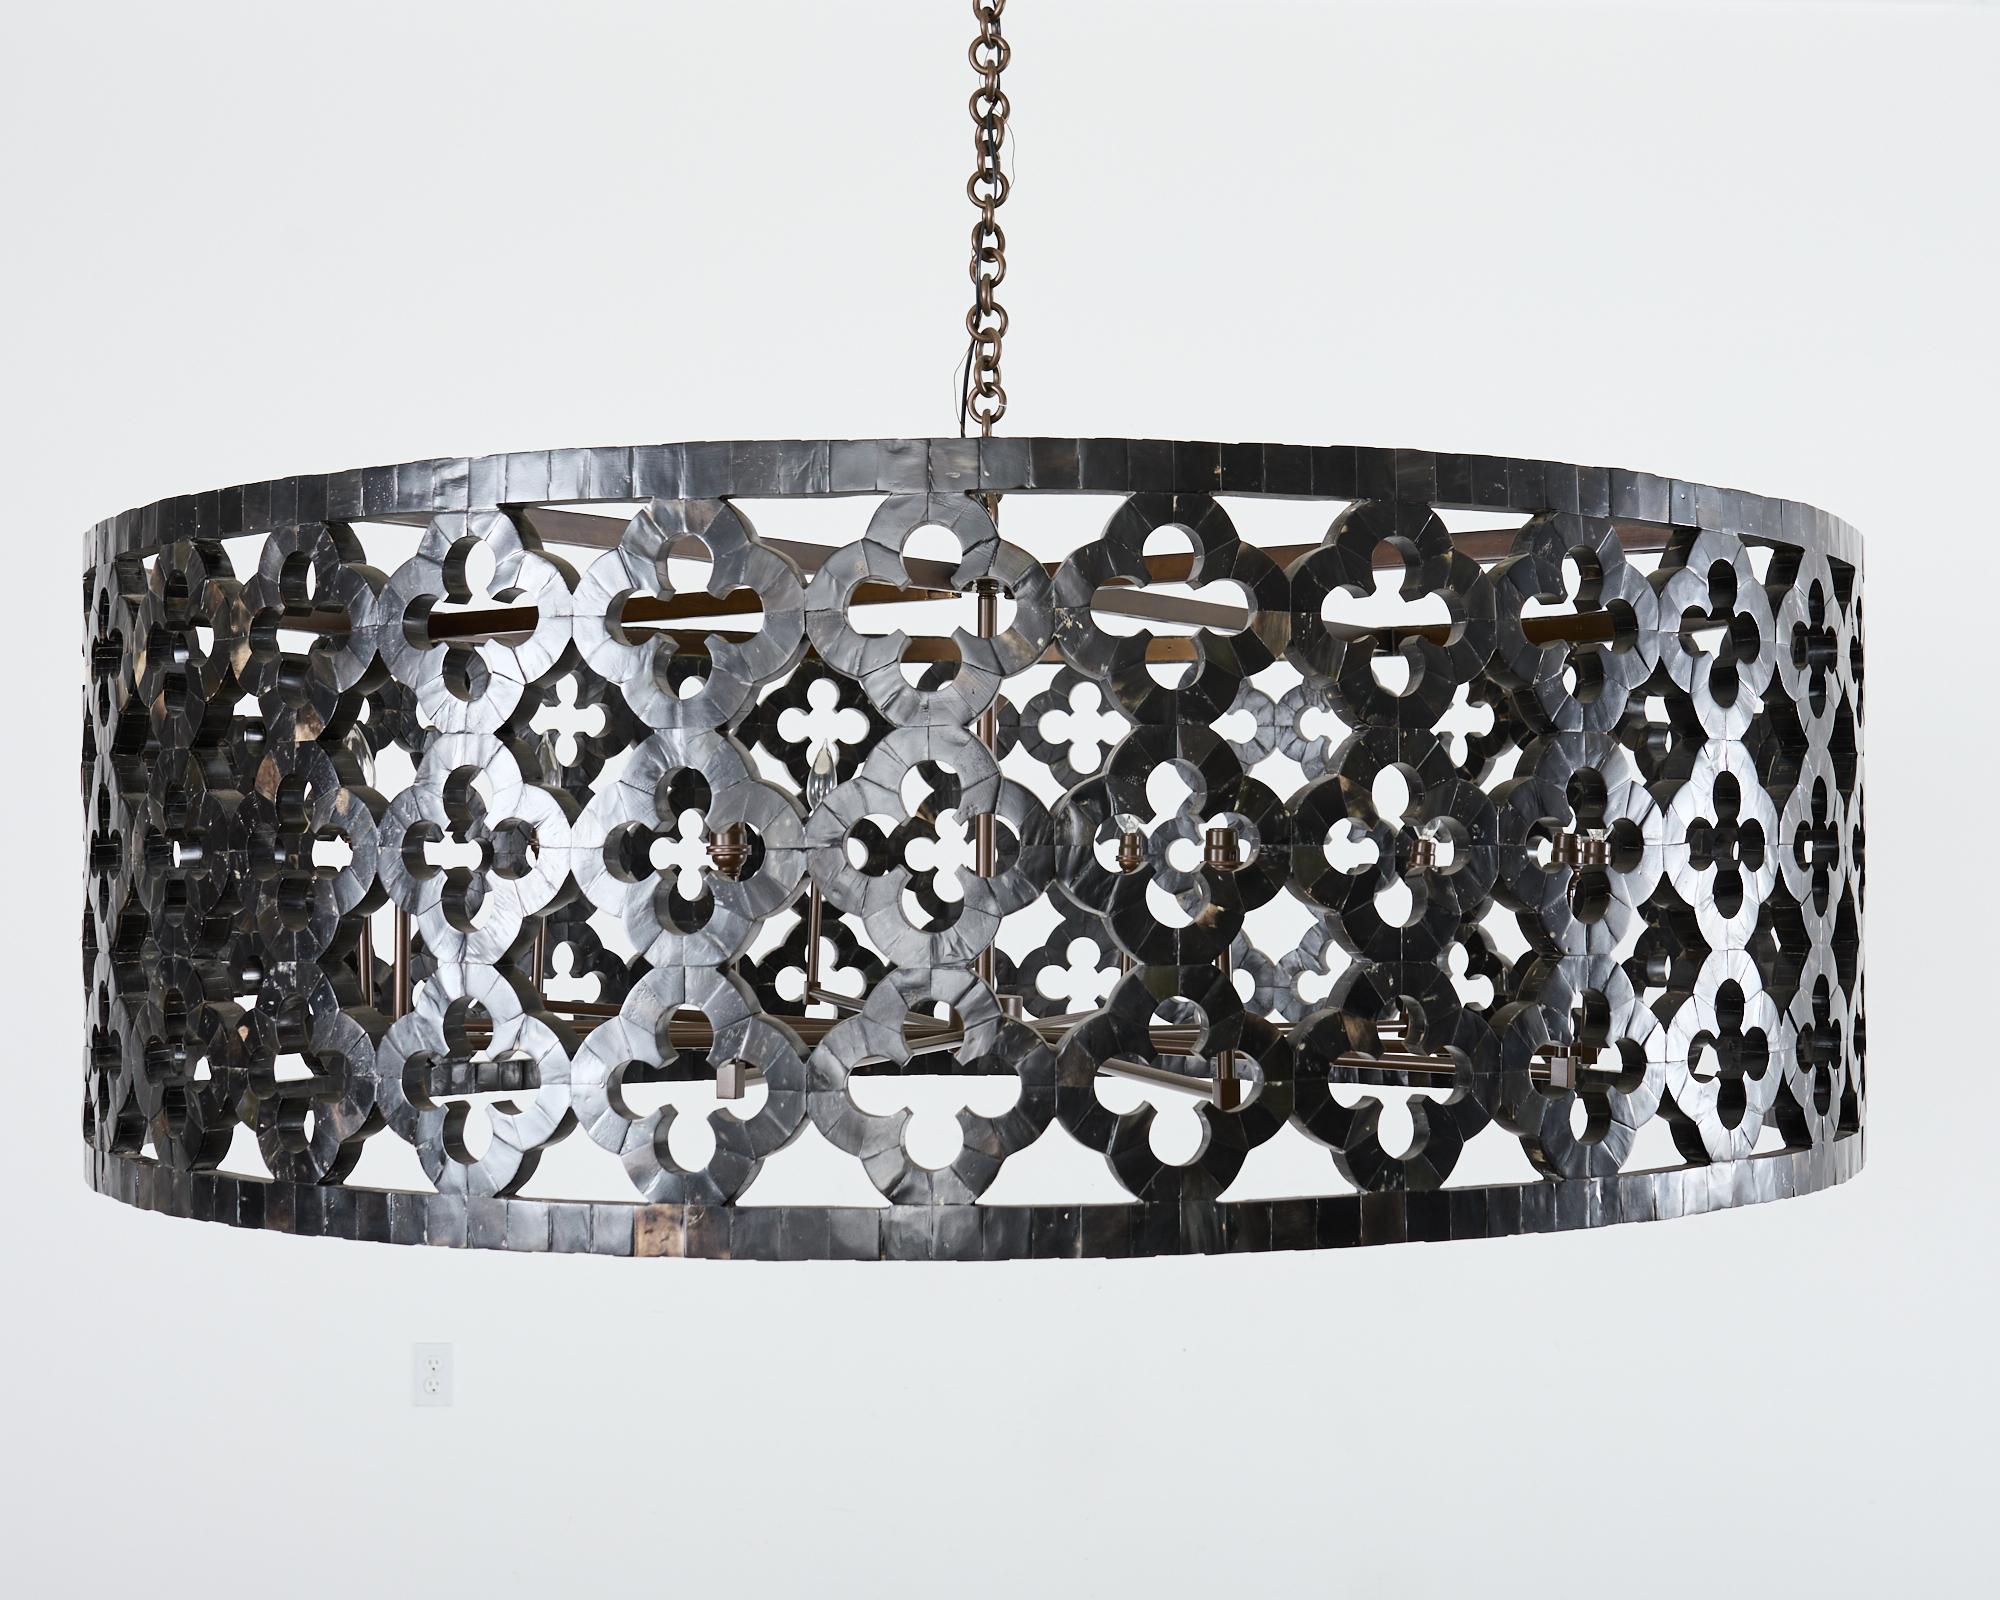 Dramatic monumental sized ten-light drum form chandelier or pendant light featuring an intricate tessalated horn veneered exterior. The chandelier has a round frame decorated with quatrefoil designs and Moorish arabesque shapes. The frame has a dark